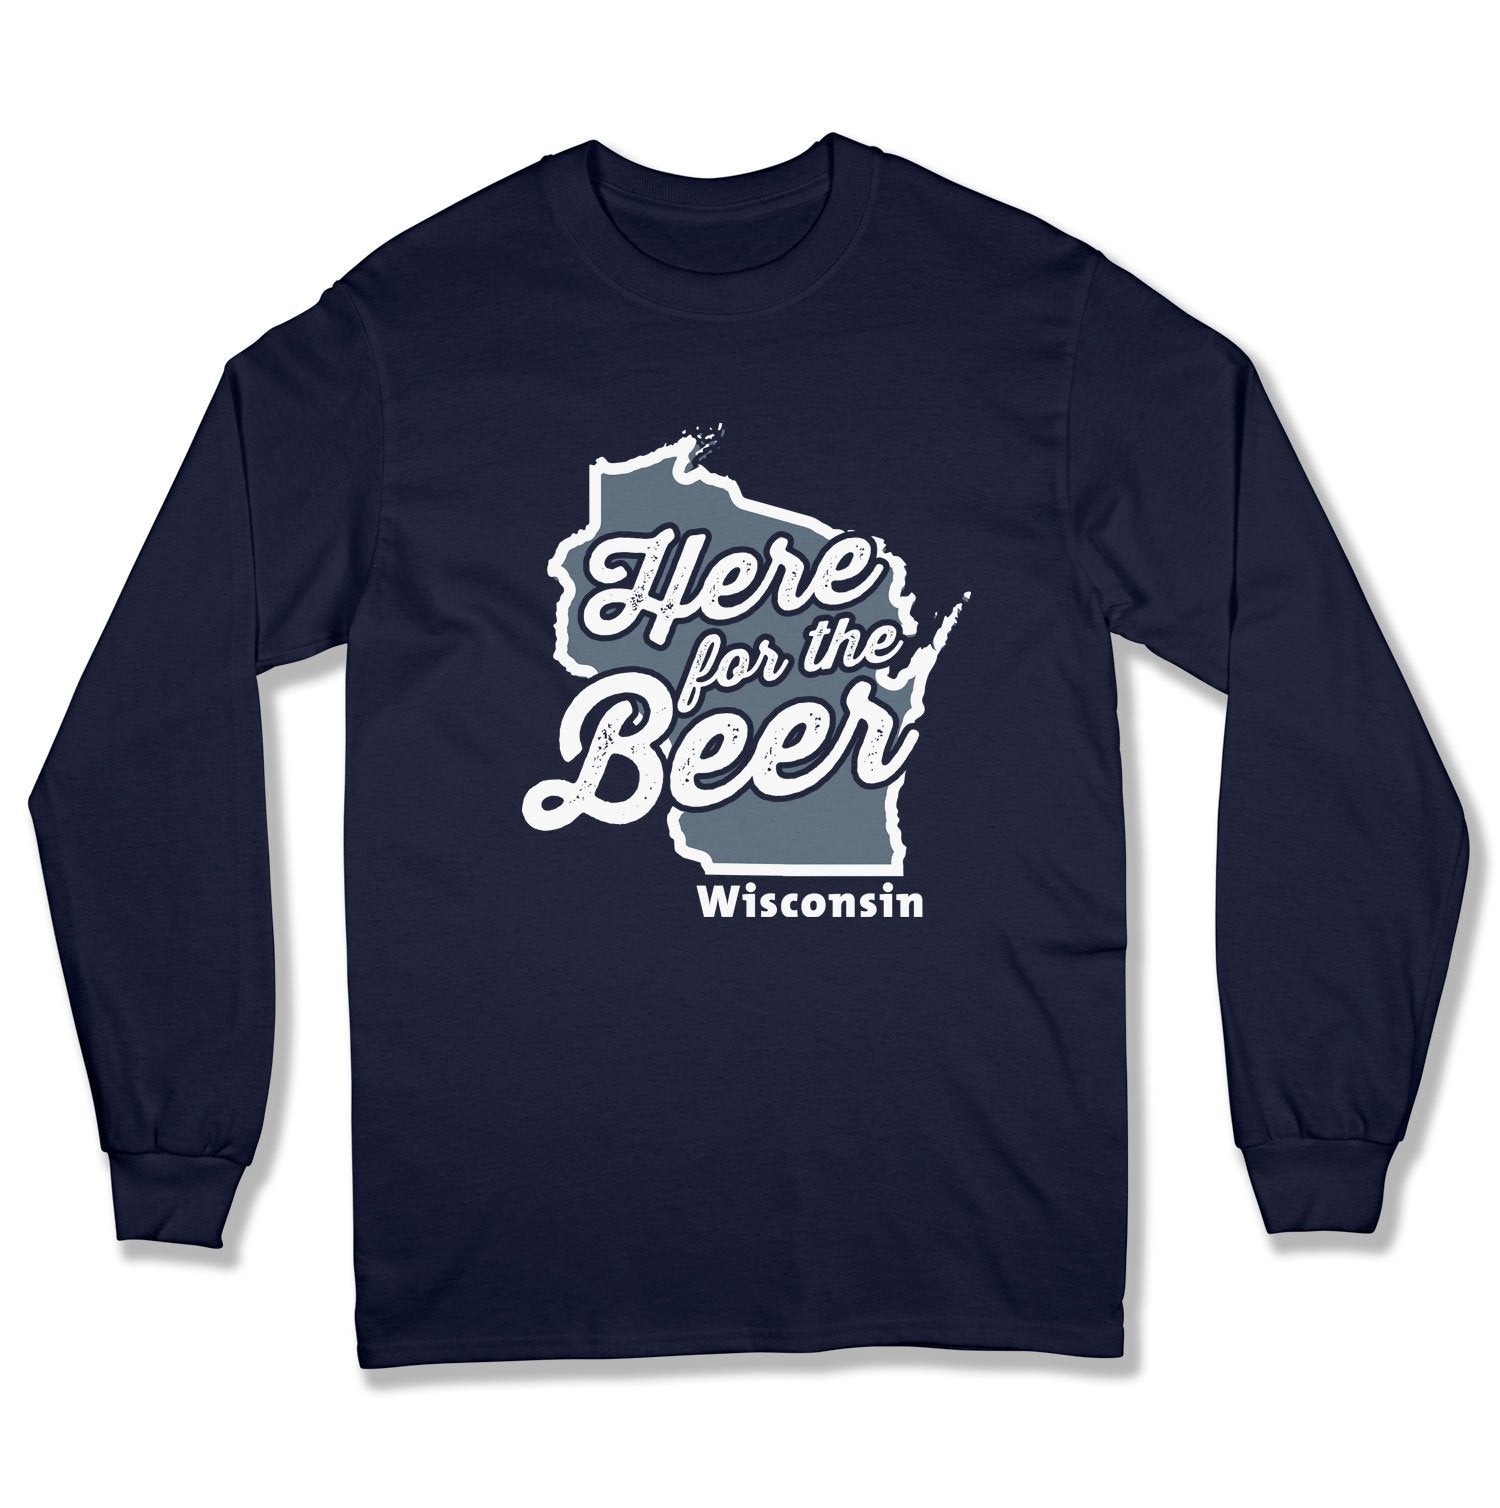 here for the beer shirt